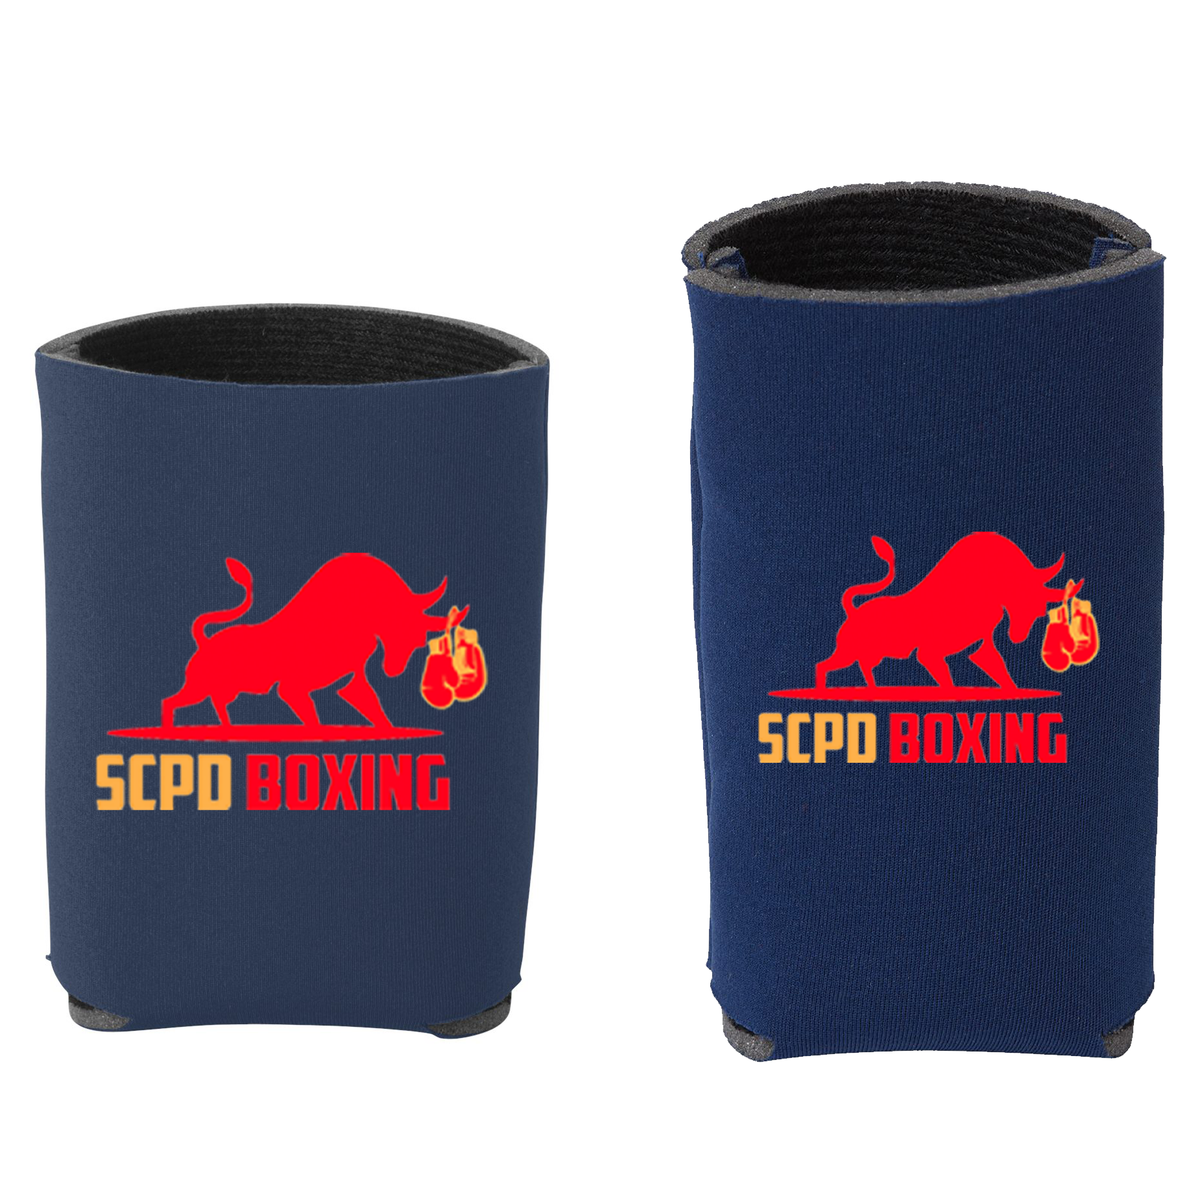 SCPD Boxing Coozie Pack